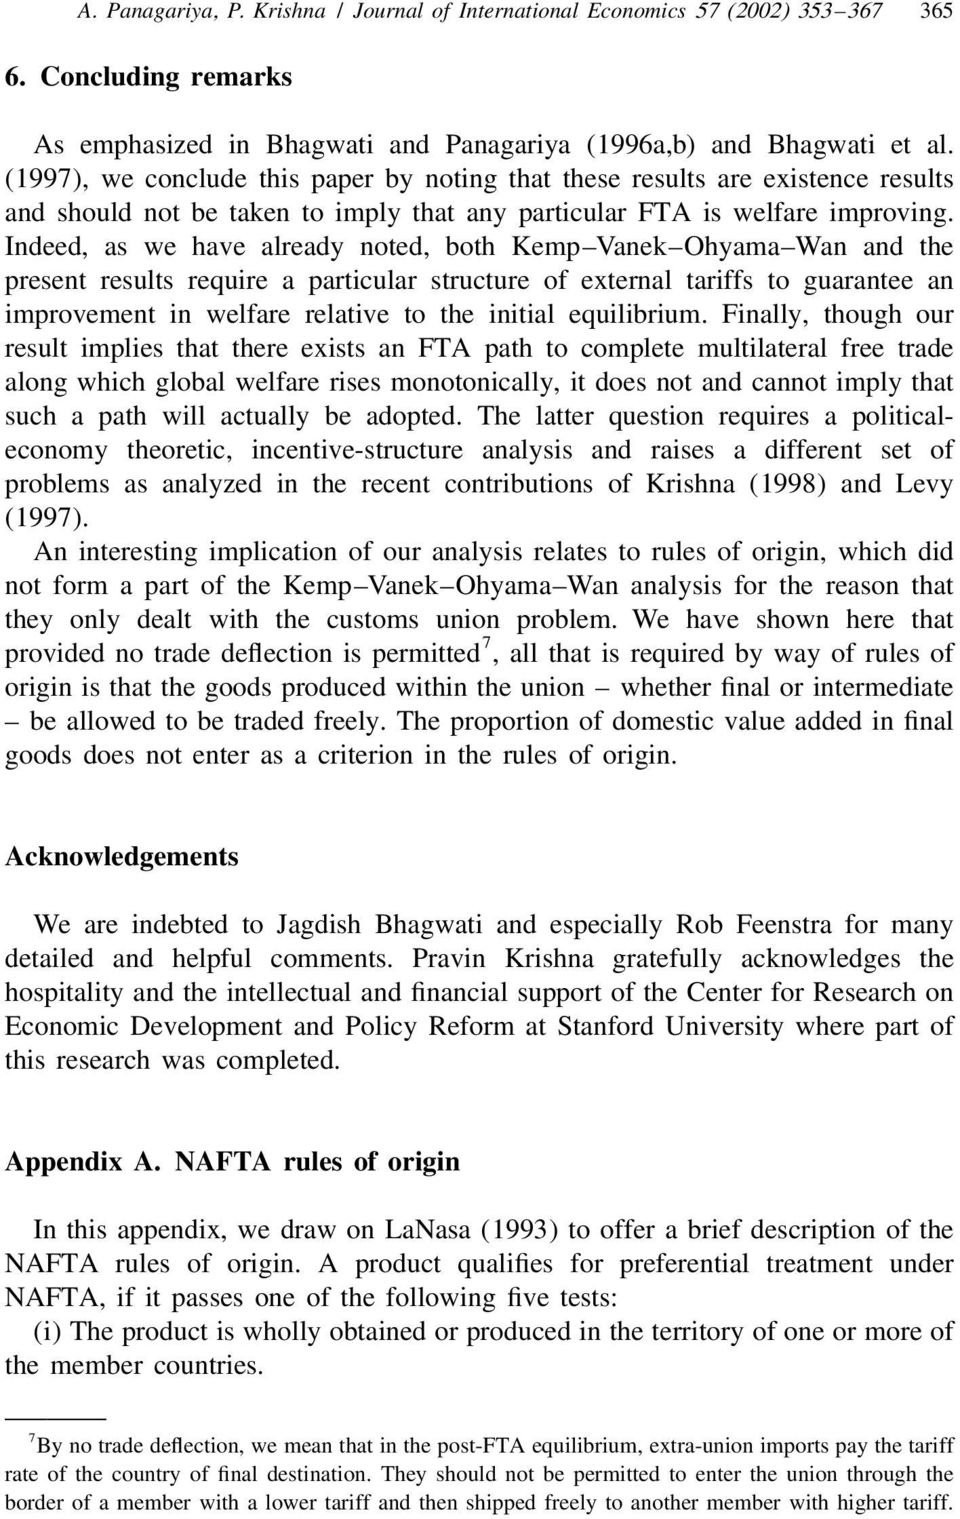 ndeed, as we have already noted, both Kemp Vanek Ohyama Wan and the present results require a particular structure of external tariffs to guarantee an improvement in welfare relative to the initial